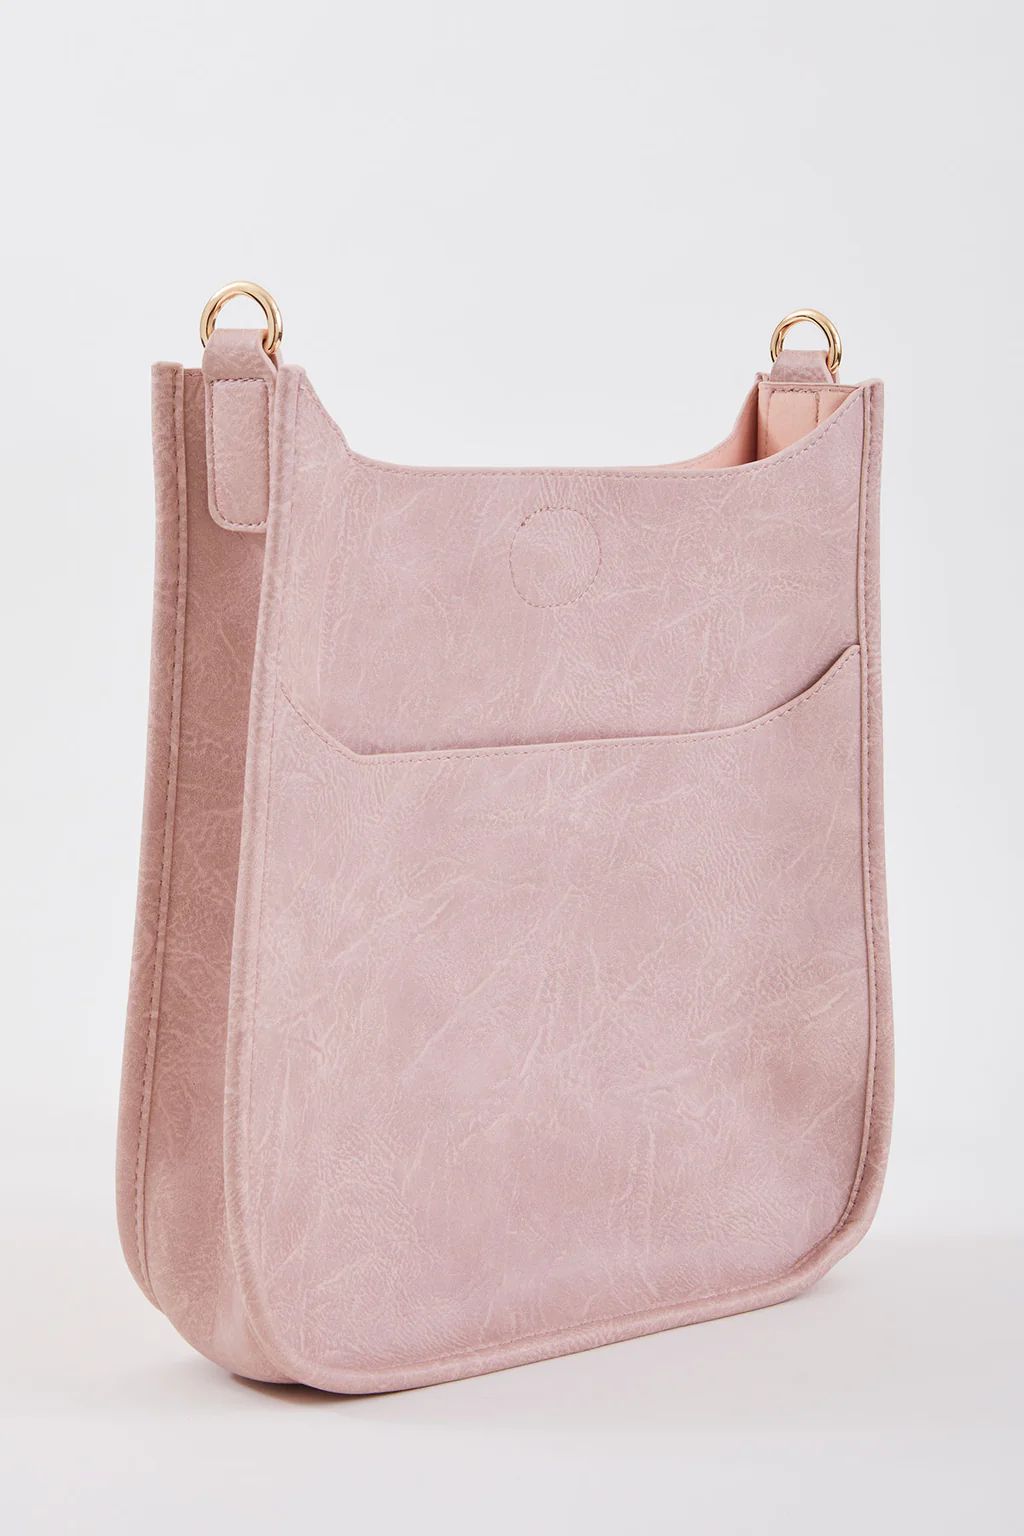 Vegan Messenger Bag (available in Blush, Stone &amp; Mustard)- STRAP NOT INCLUDED | Social Threads